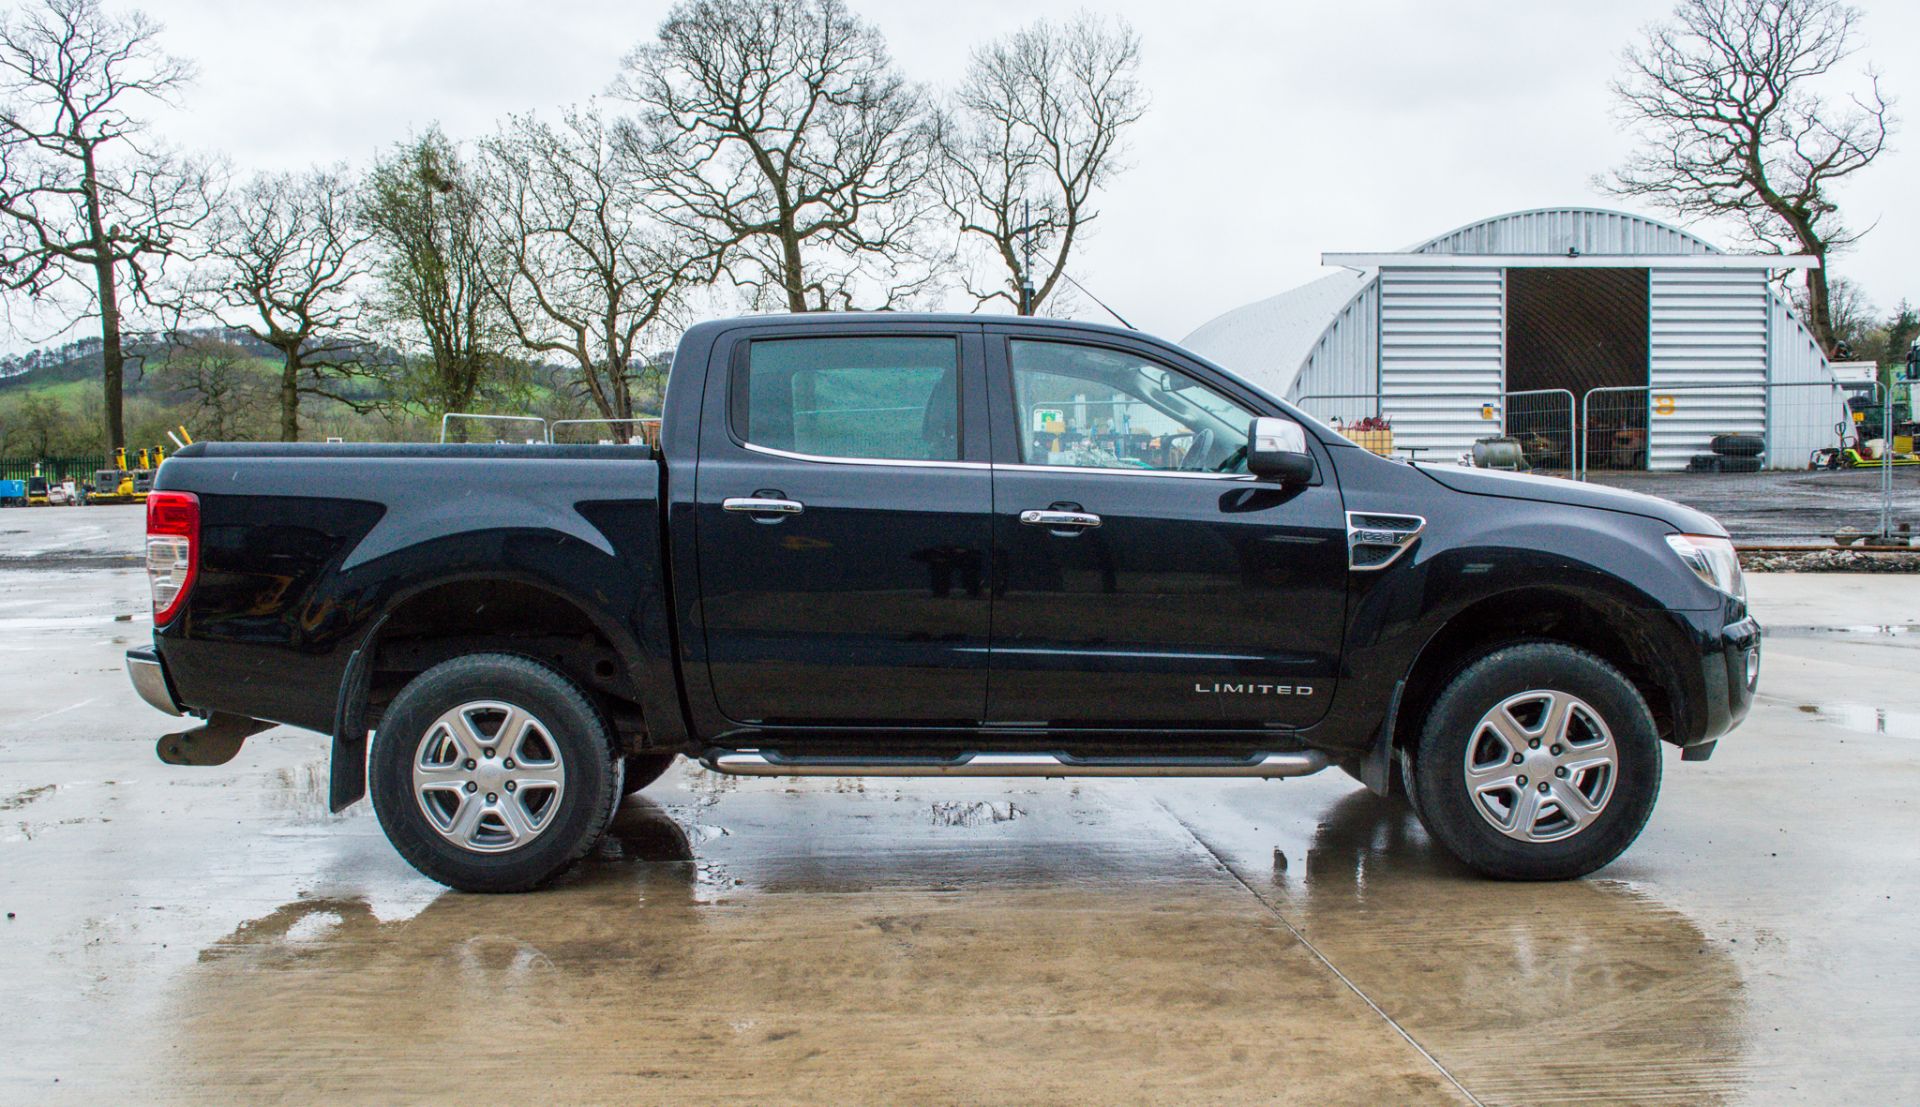 Ford Ranger 2.2 TDCI 150 Limited 4wd automatic double cab pick up - Image 14 of 28